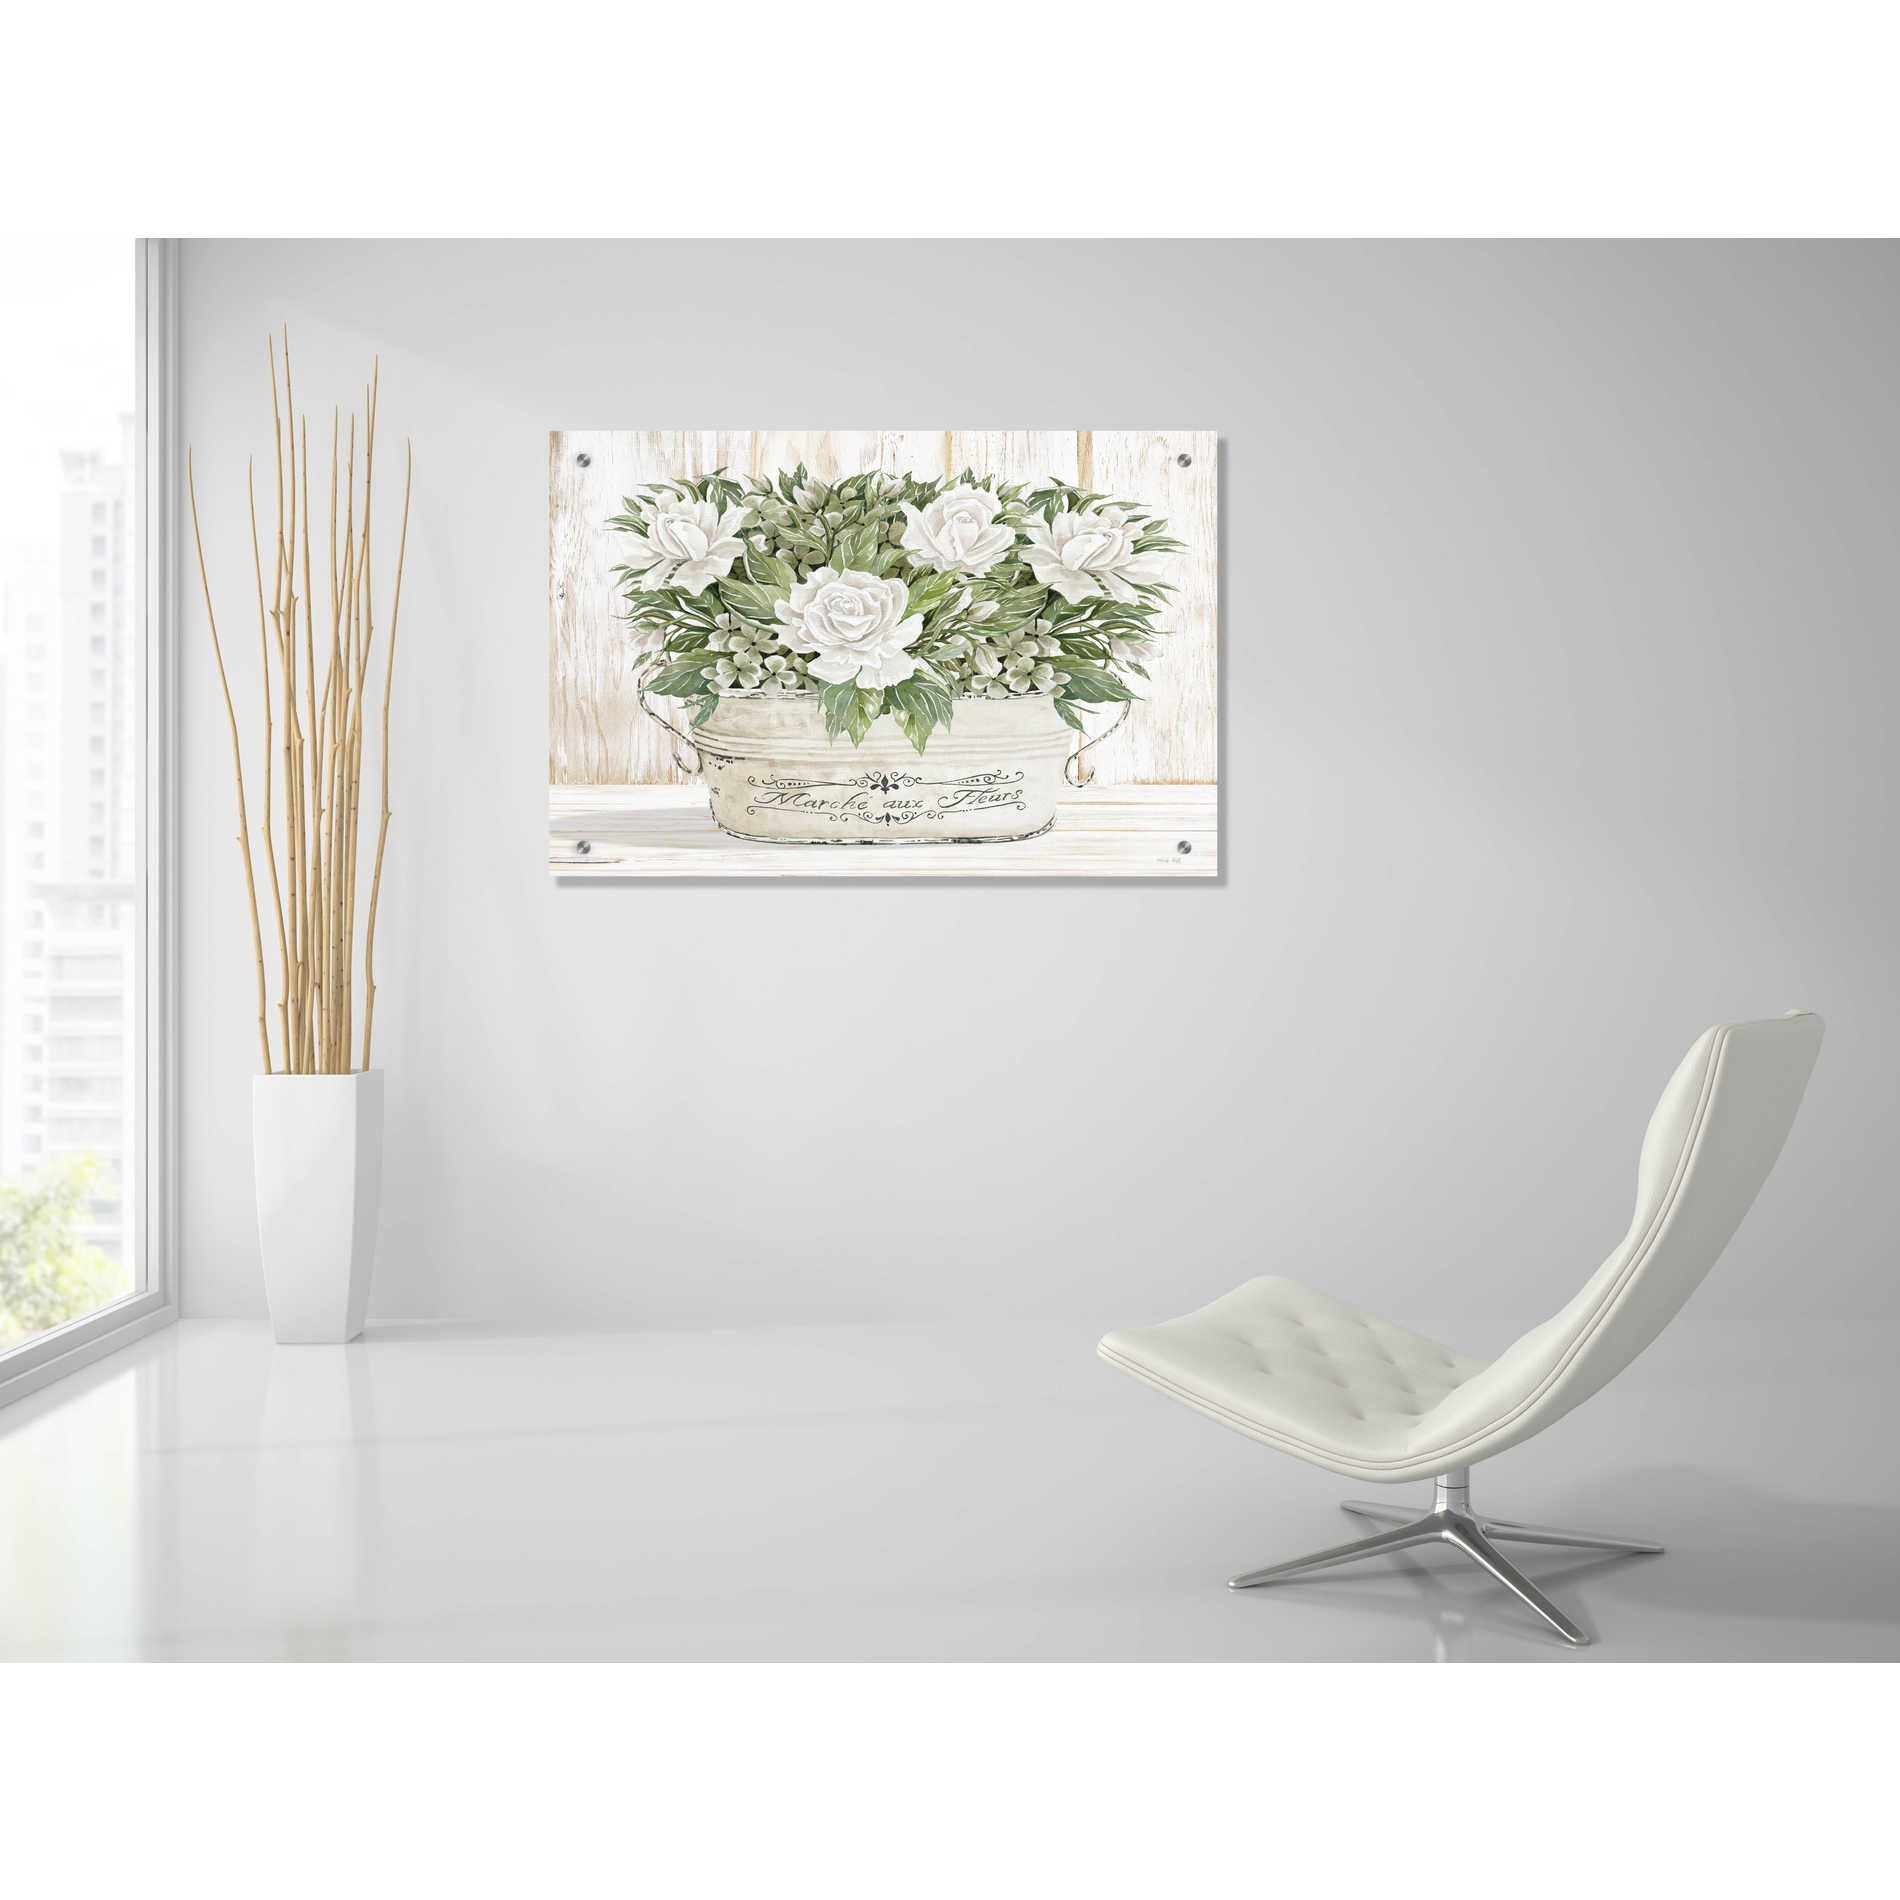 Epic Art 'Roses in White' by Cindy Jacobs, Acrylic Glass Wall Art,36x24